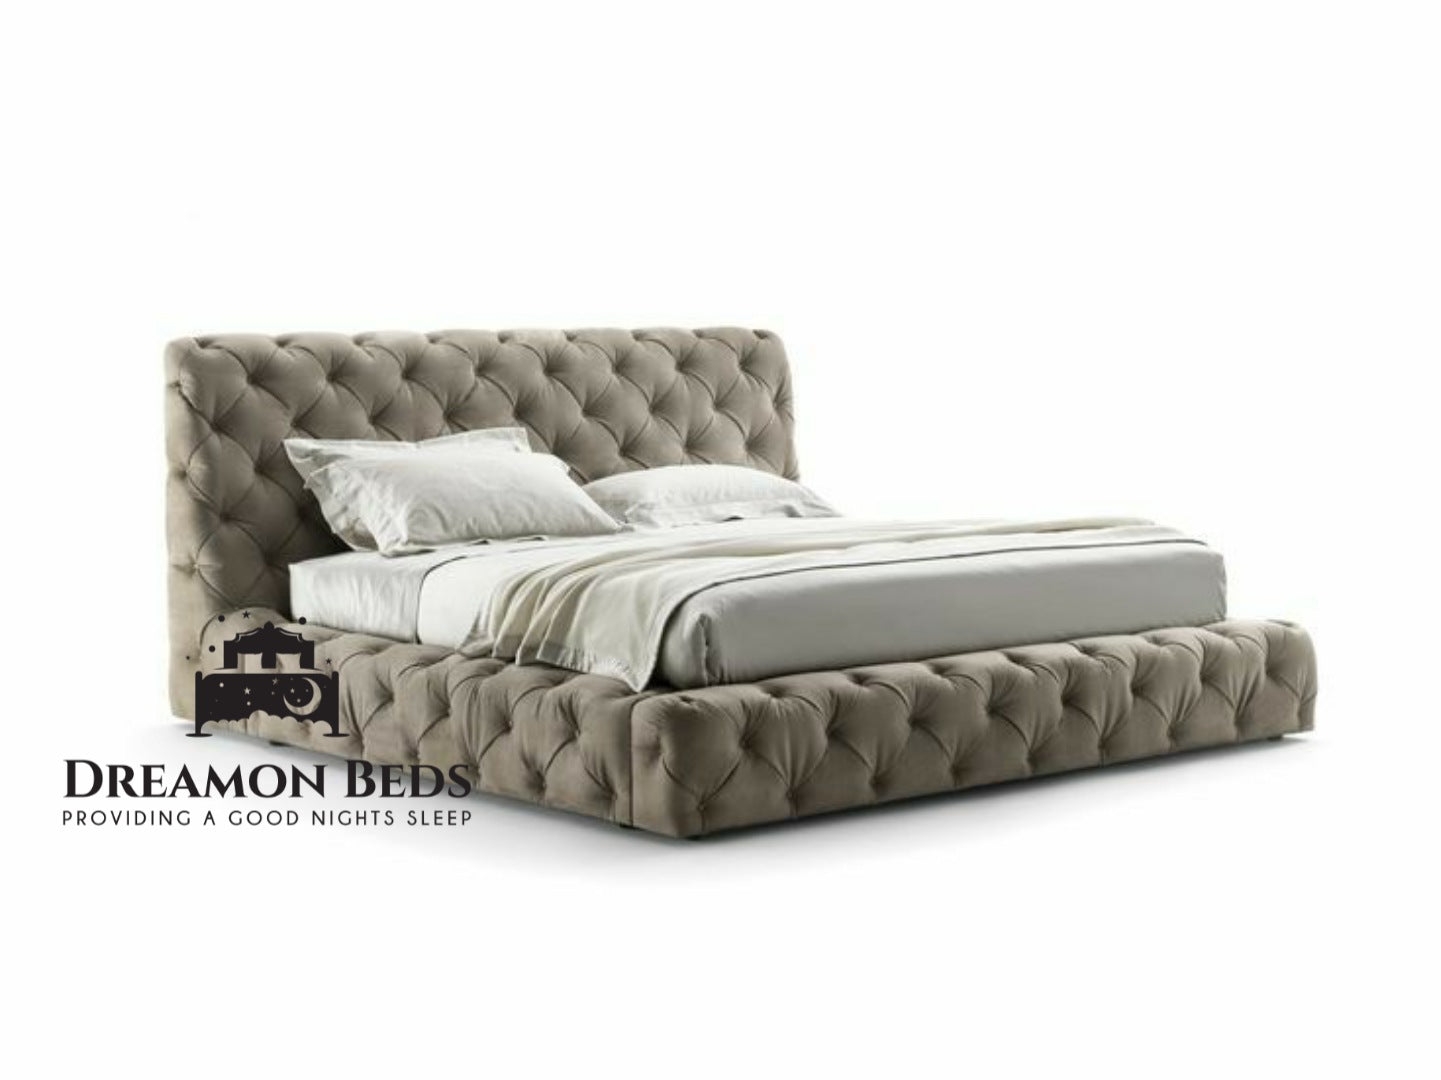 Dakota Ambassador Bed Frame Available With Ottoman Storage – Endless Customisation – Choice Of 25 Colours & Materials – Dreamon Beds